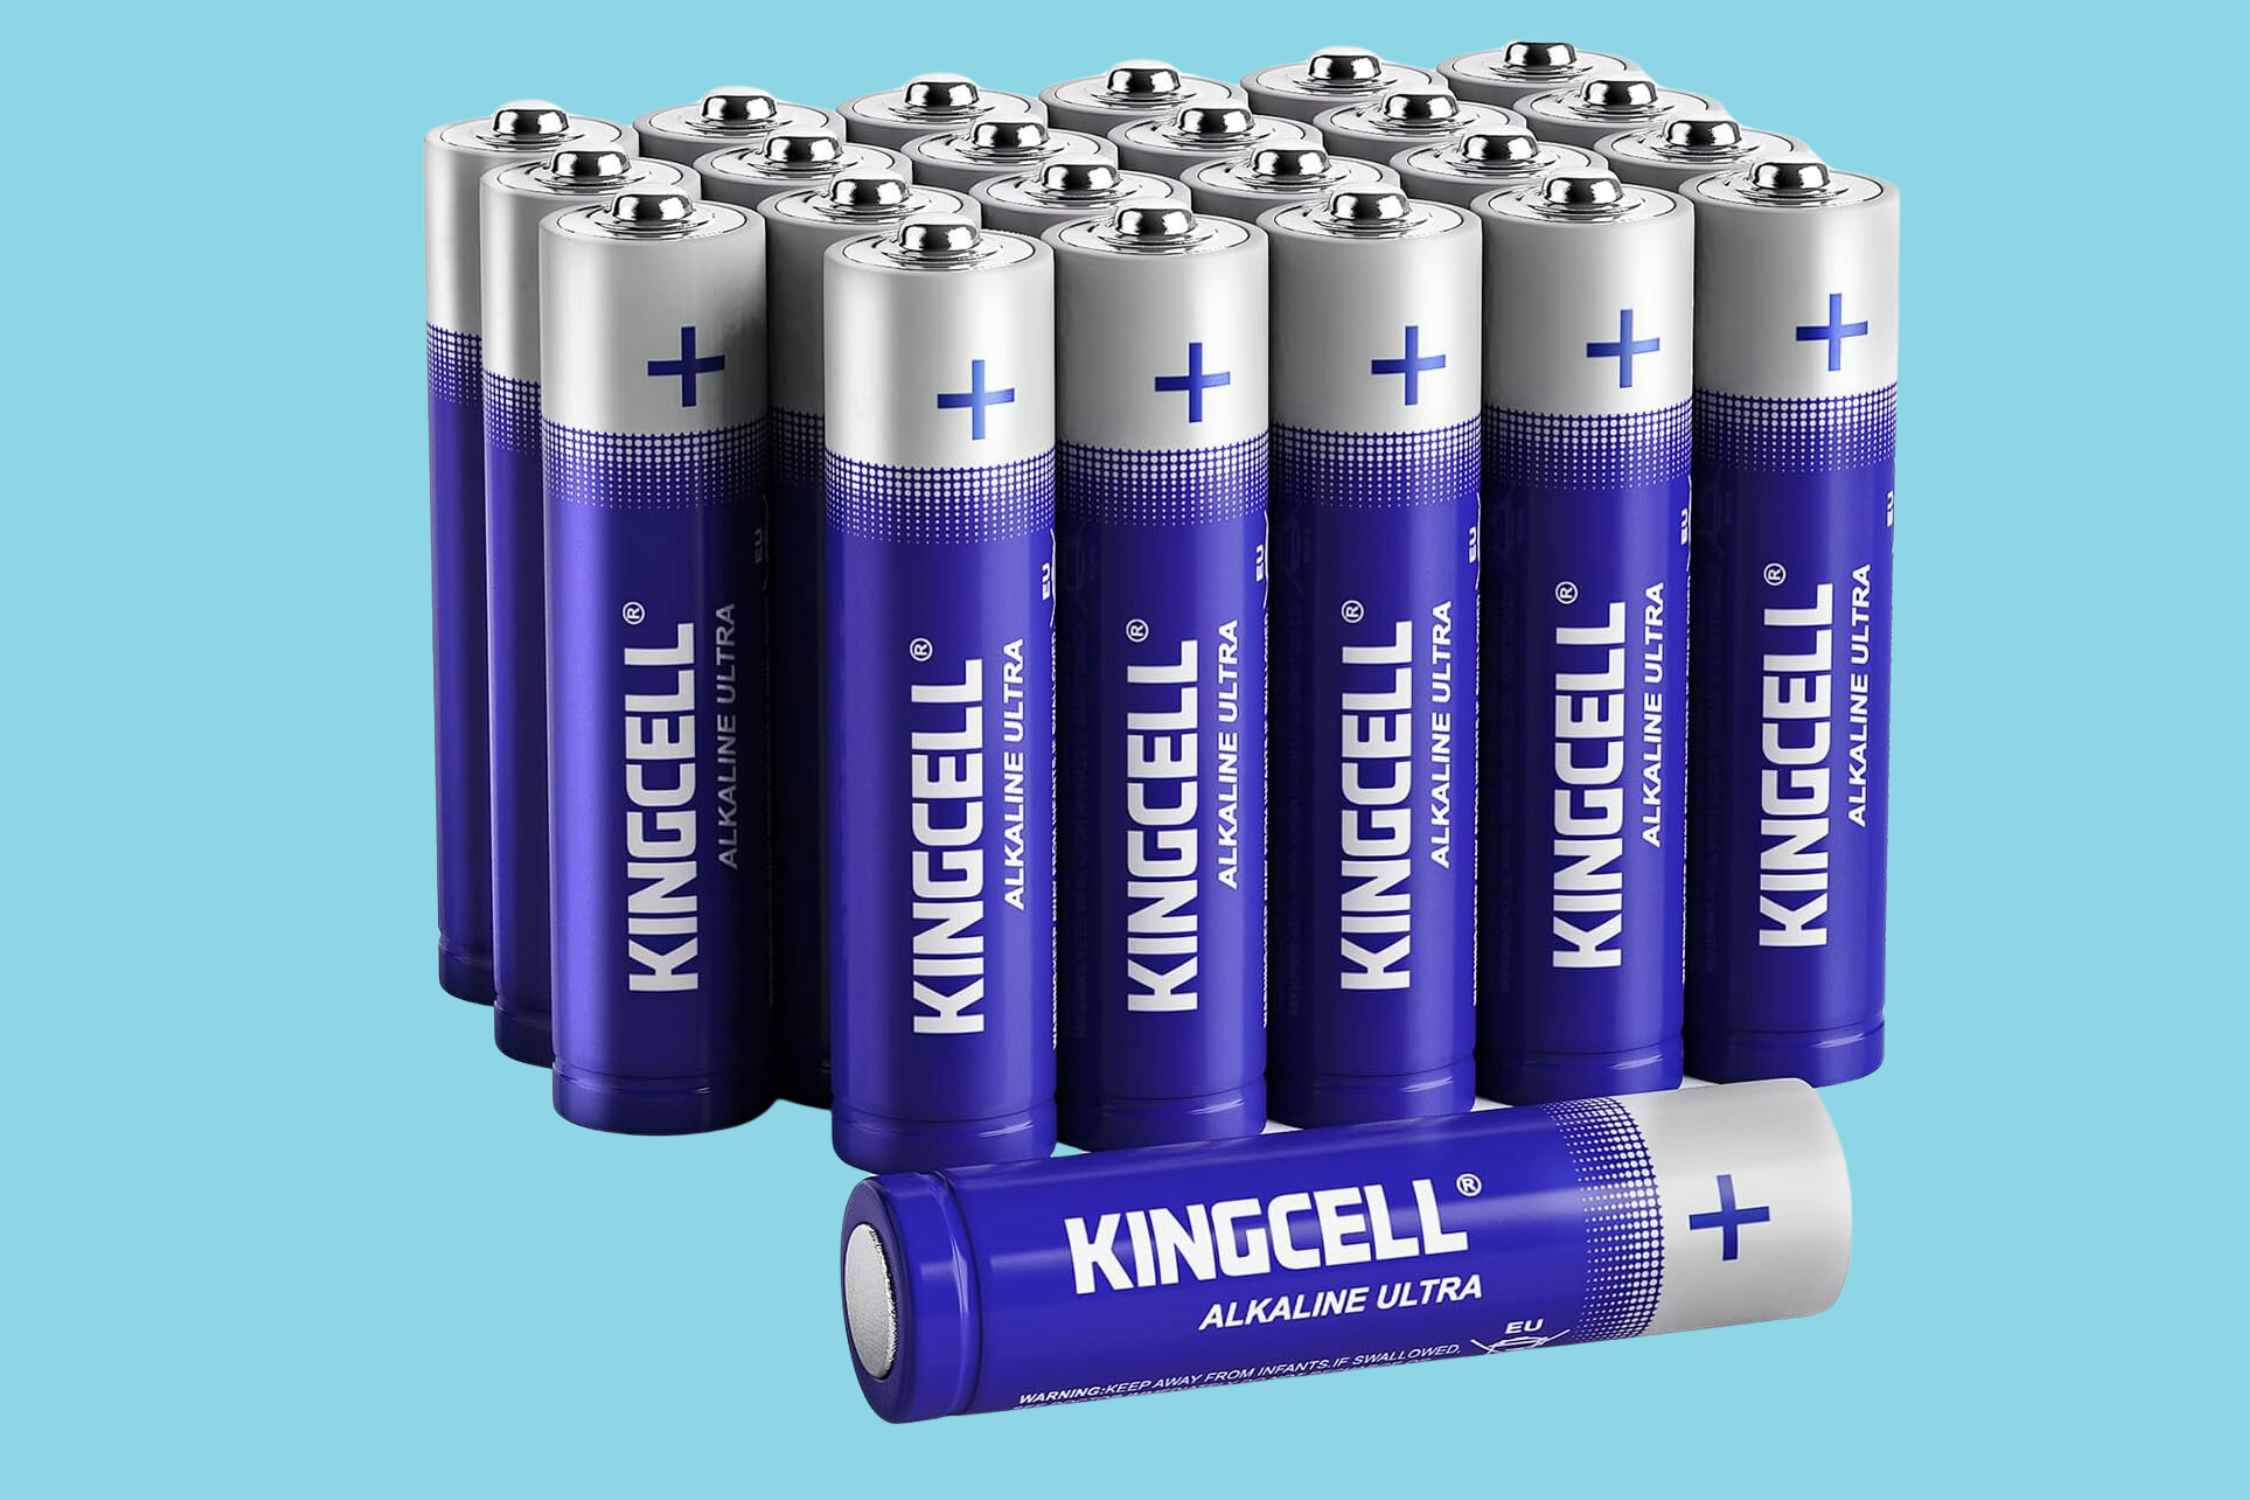 KingCell 24-Count AAA Batteries, Just $4.39 on Amazon